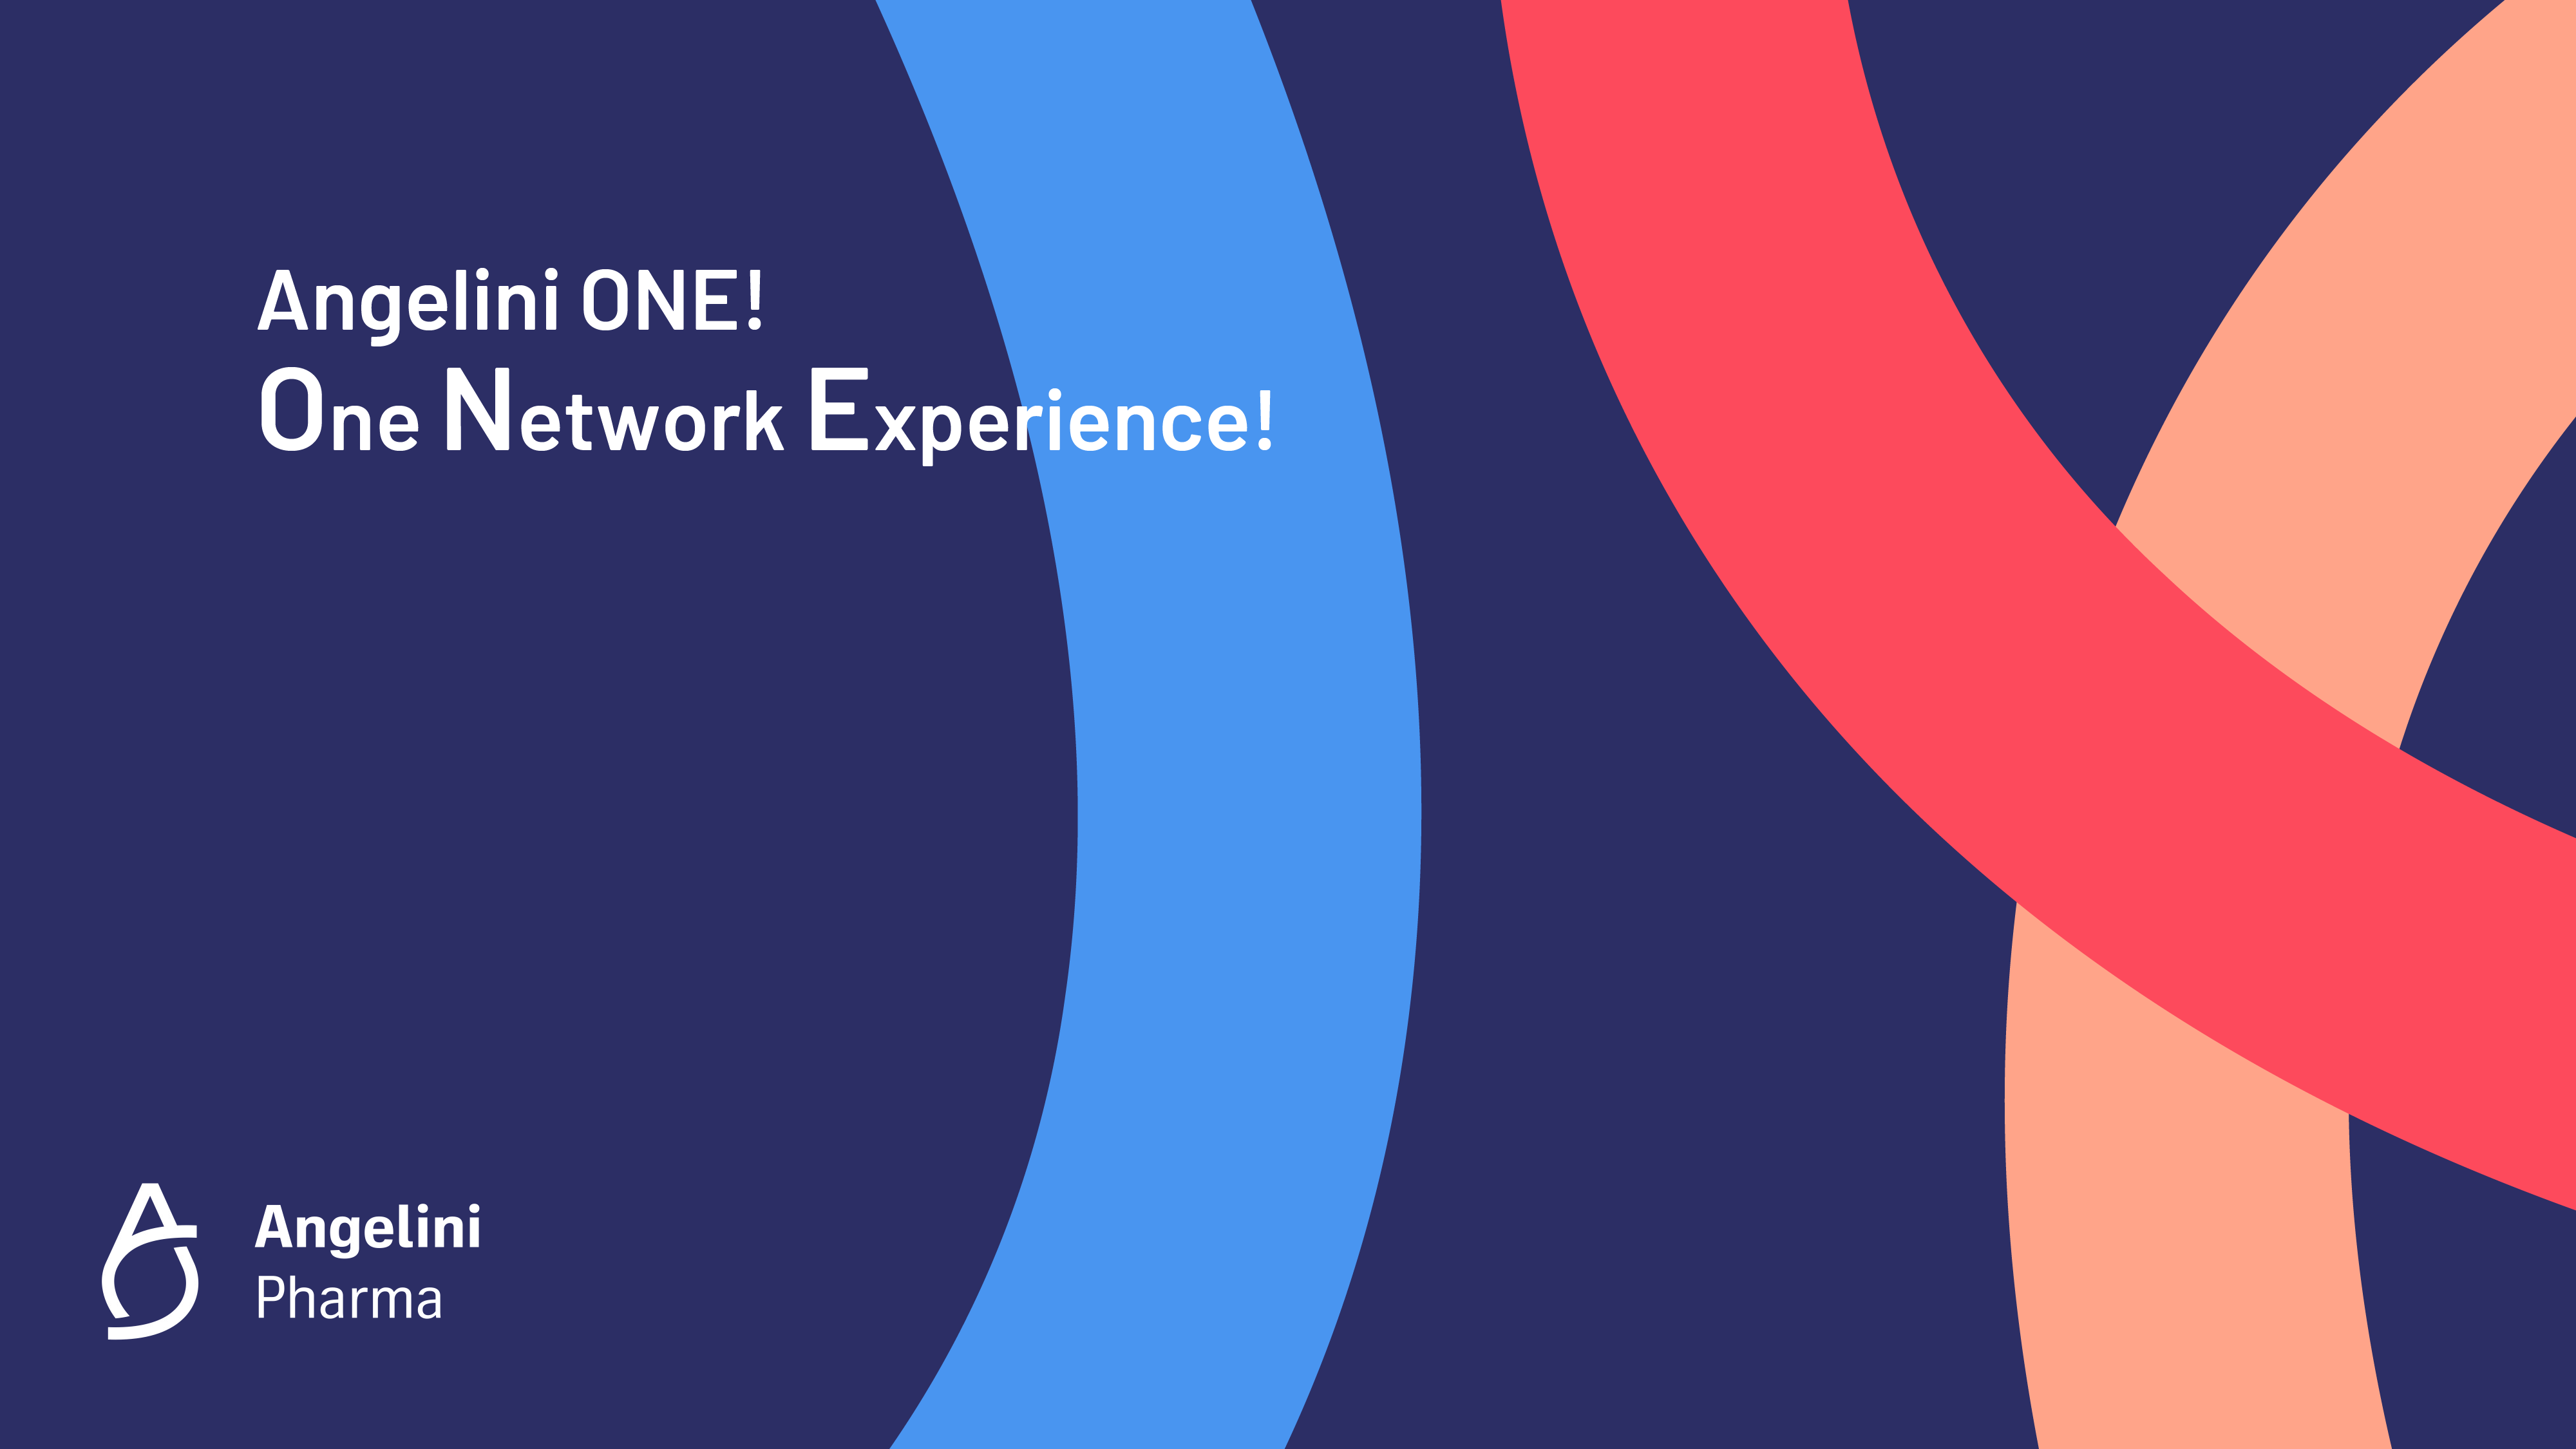 Angelini ONE! One Network Experience!